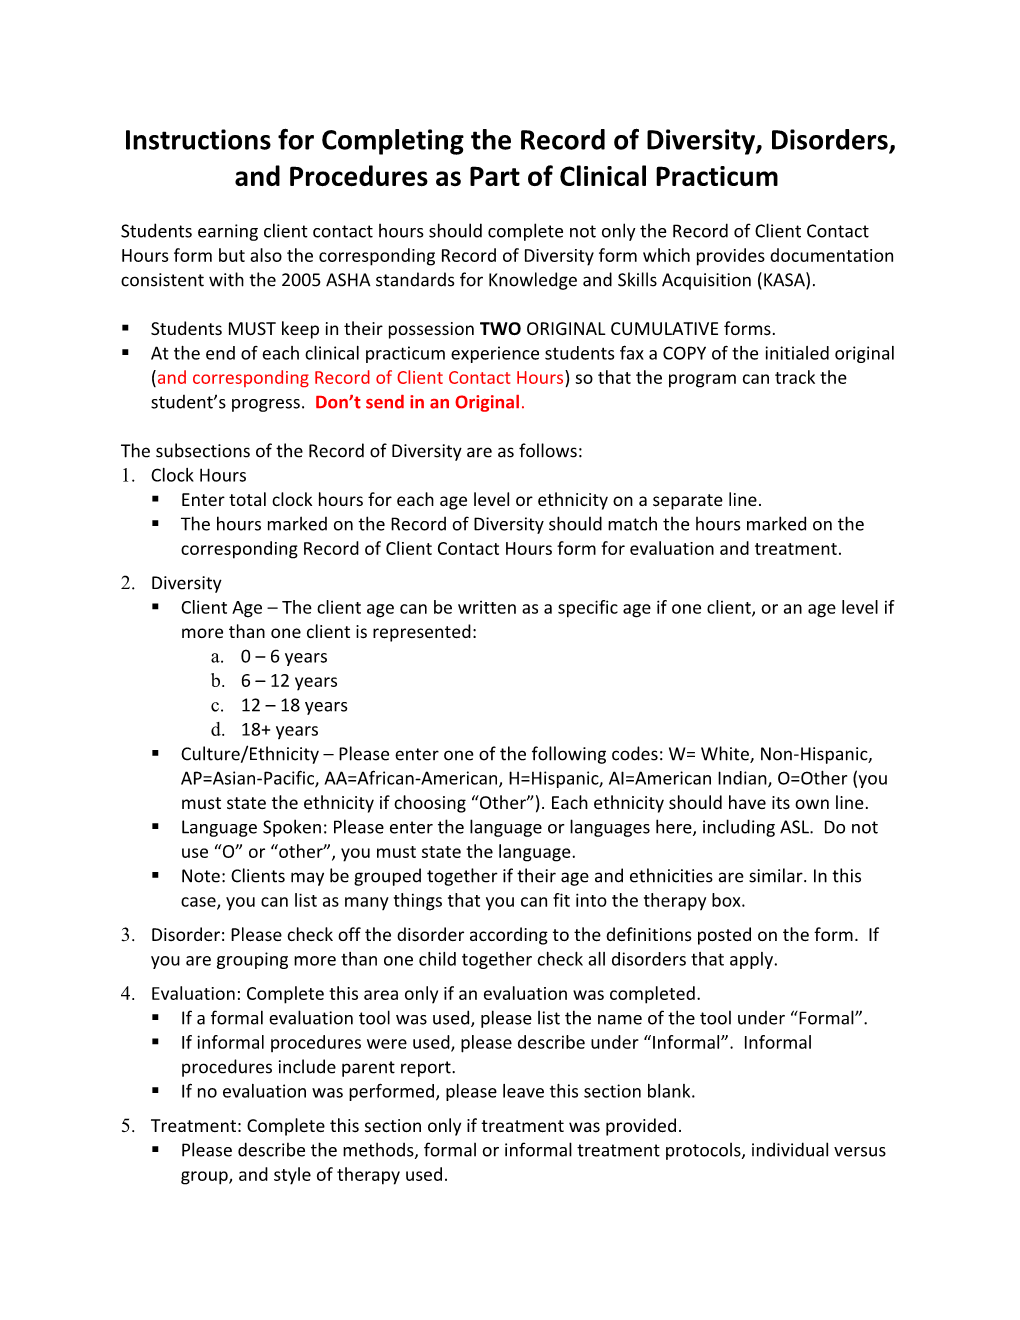 Instructions for Completing the Record of Diversity, Disorders, and Procedures As Part